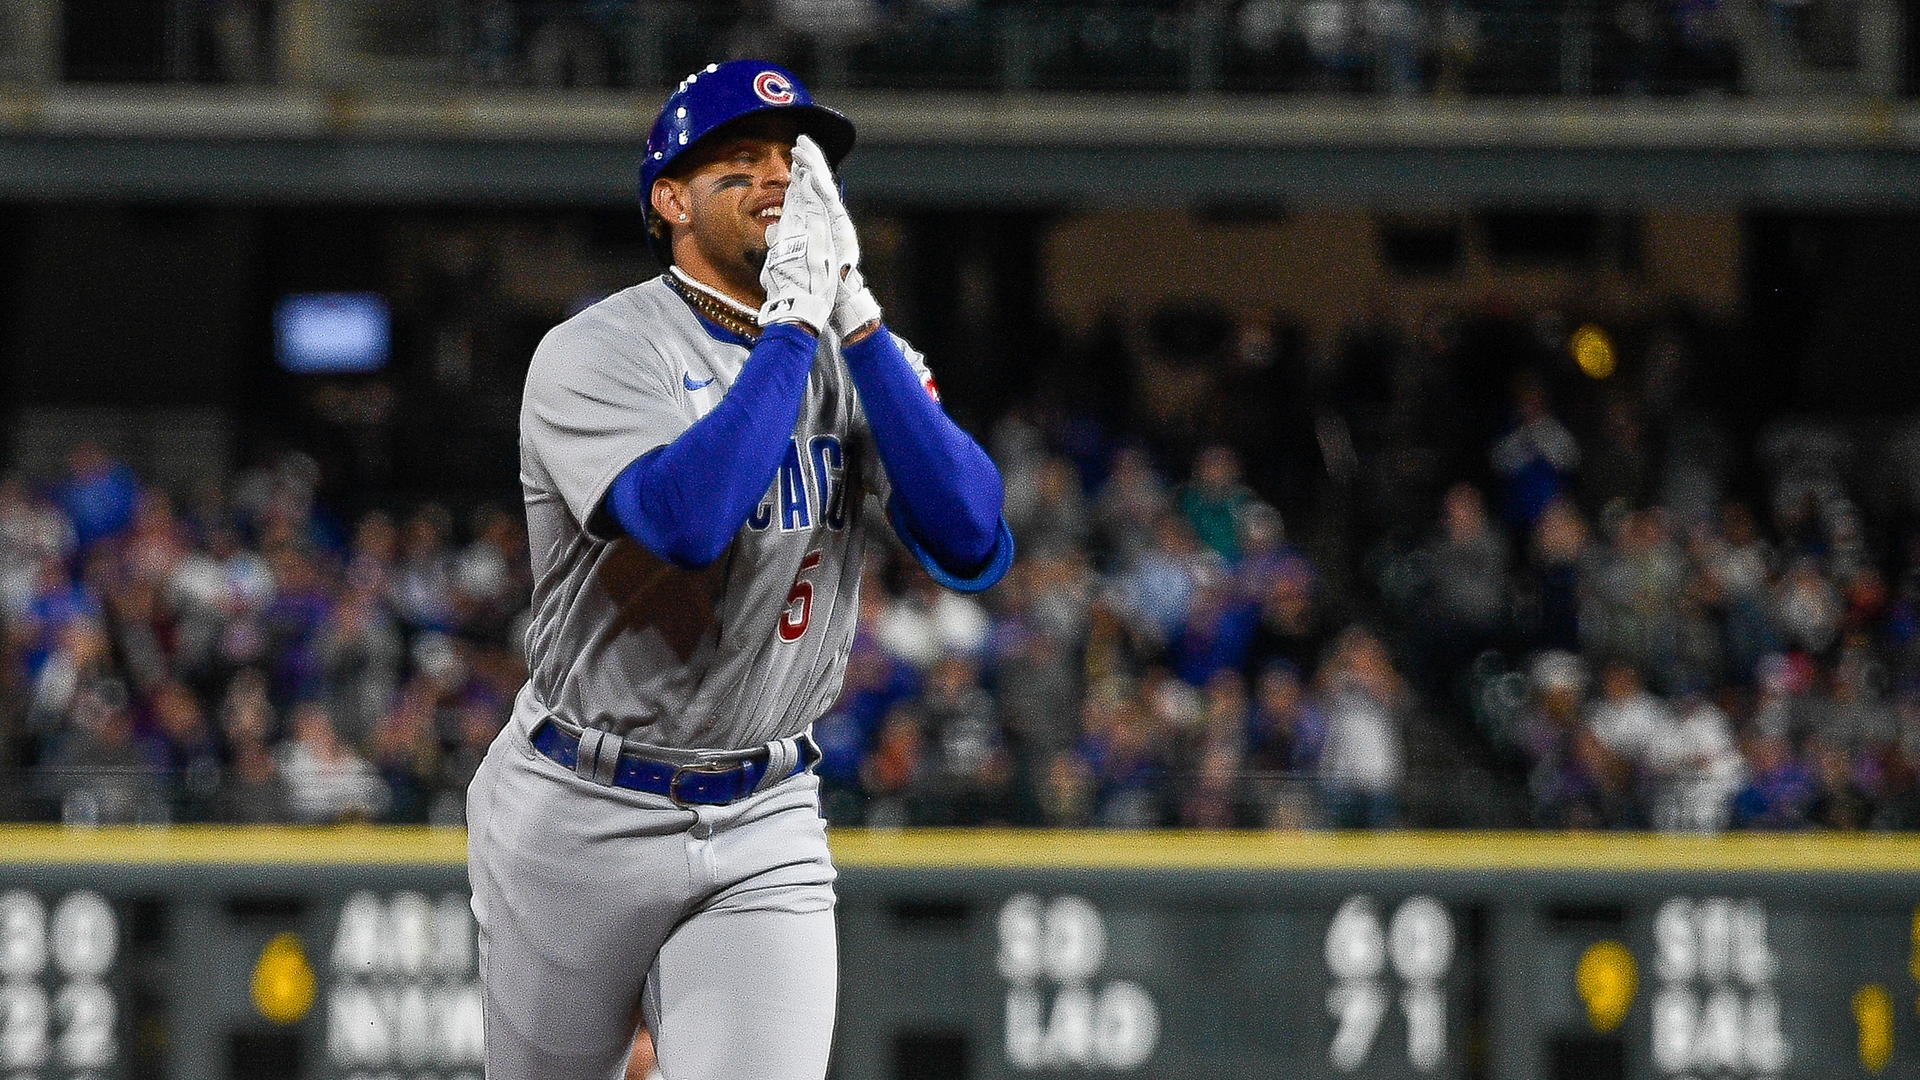 Chicago Cubs: '108 is the magic number